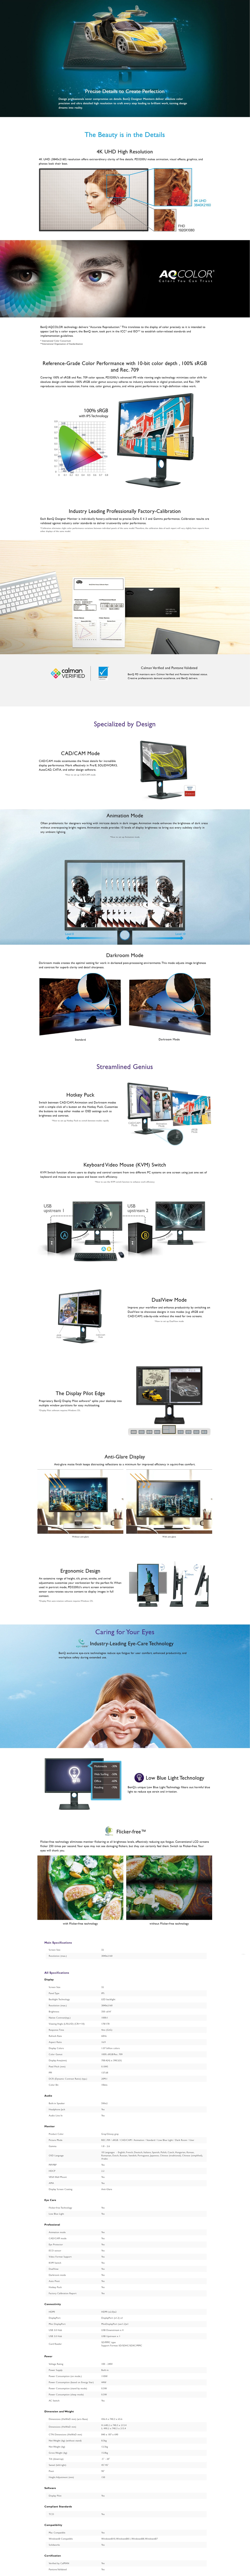 A large marketing image providing additional information about the product BenQ DesignVue PD3200U 32" UHD 4K 60Hz 4MS IPS LED Professional Monitor - Additional alt info not provided